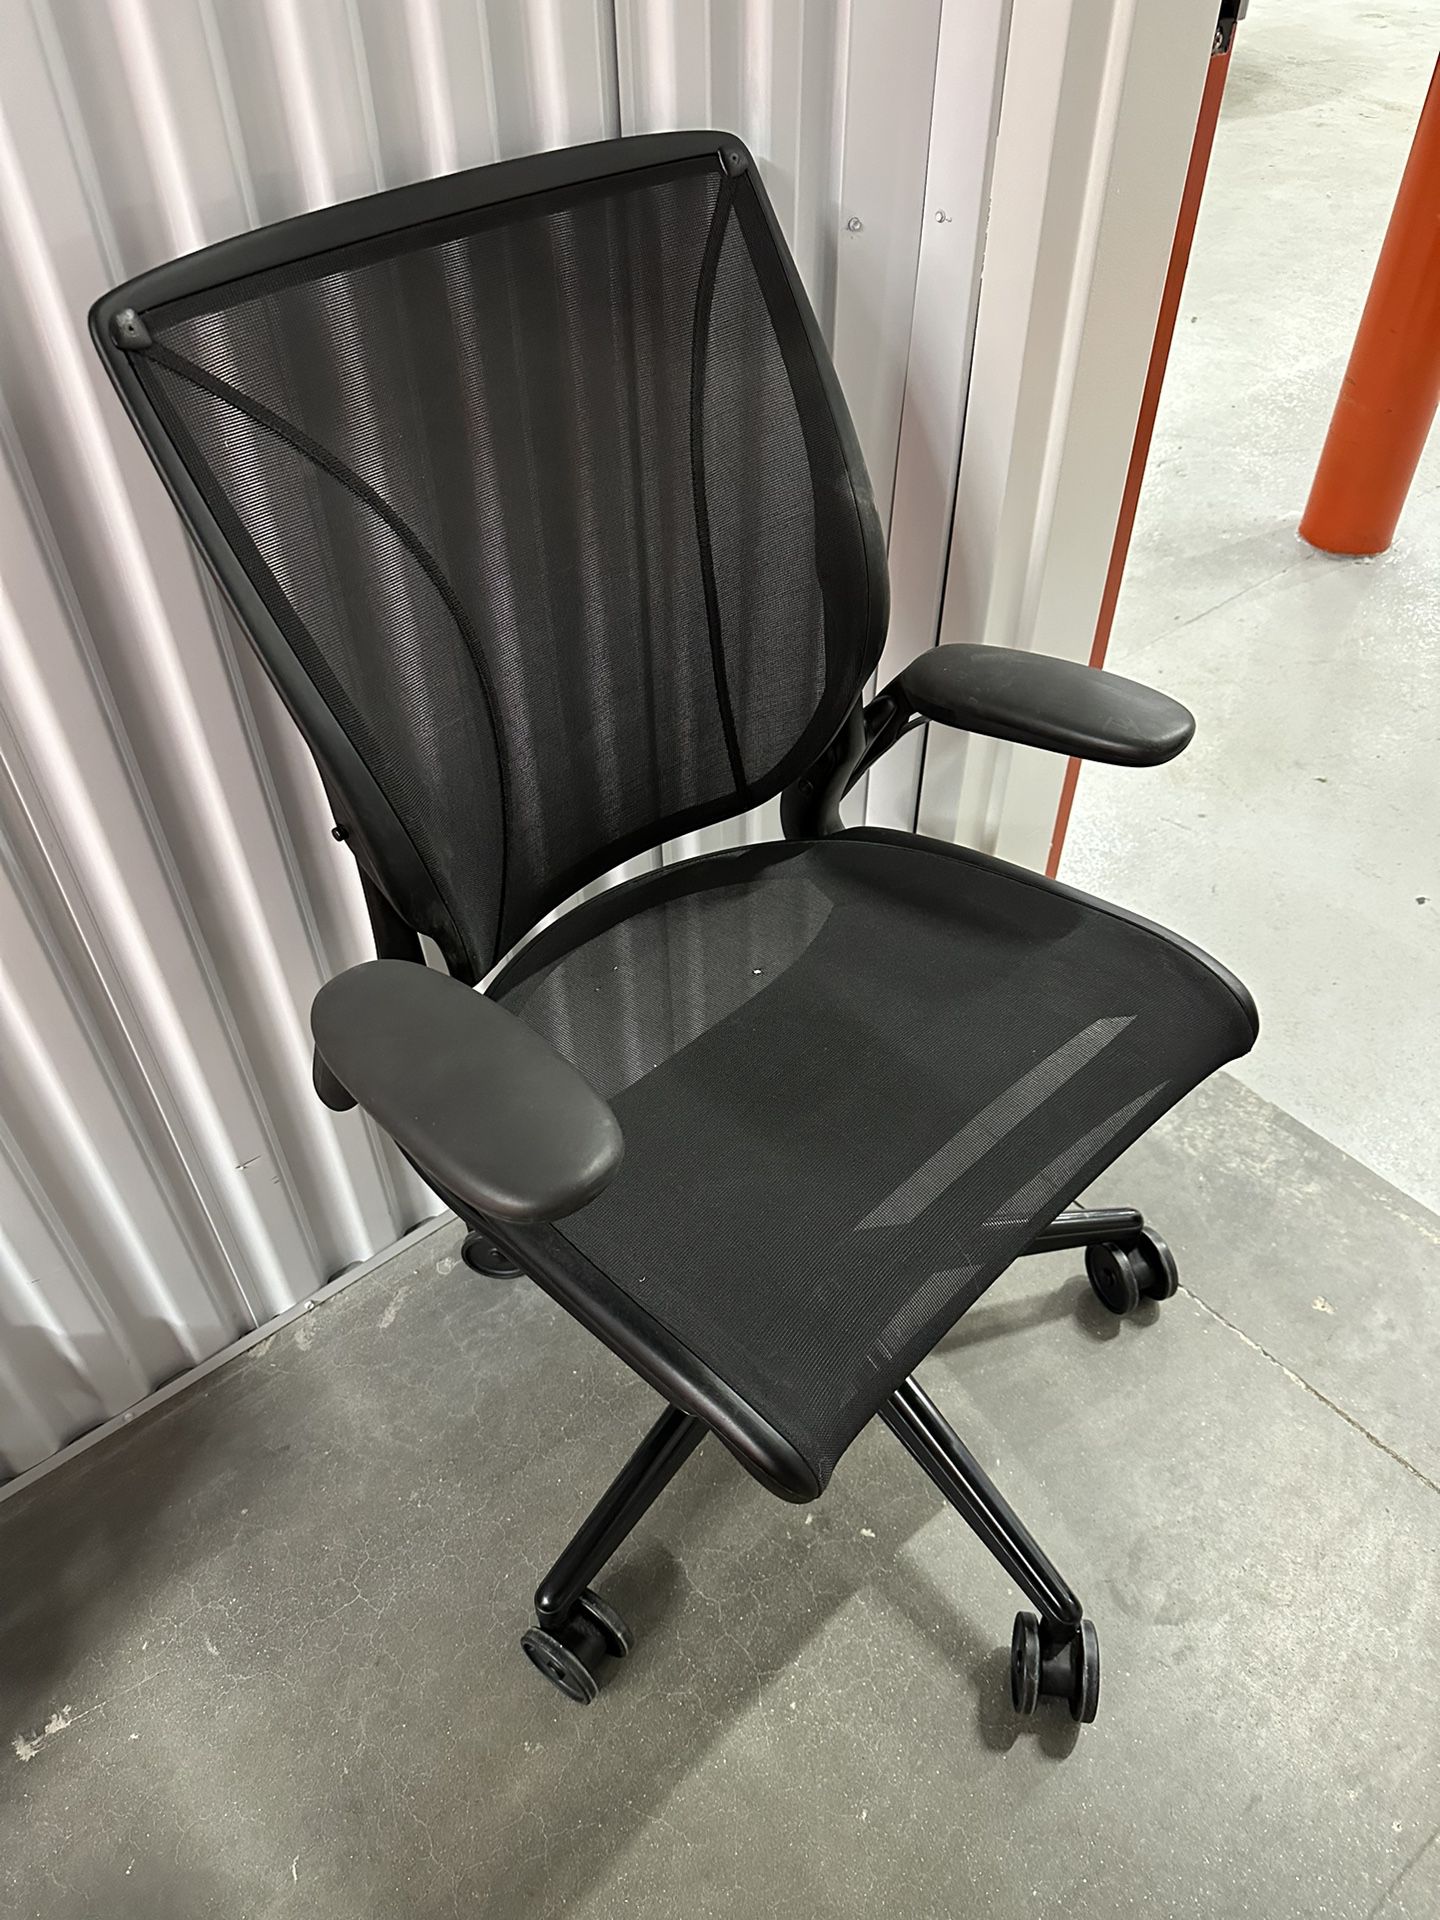 Humanscale Office Chair $75